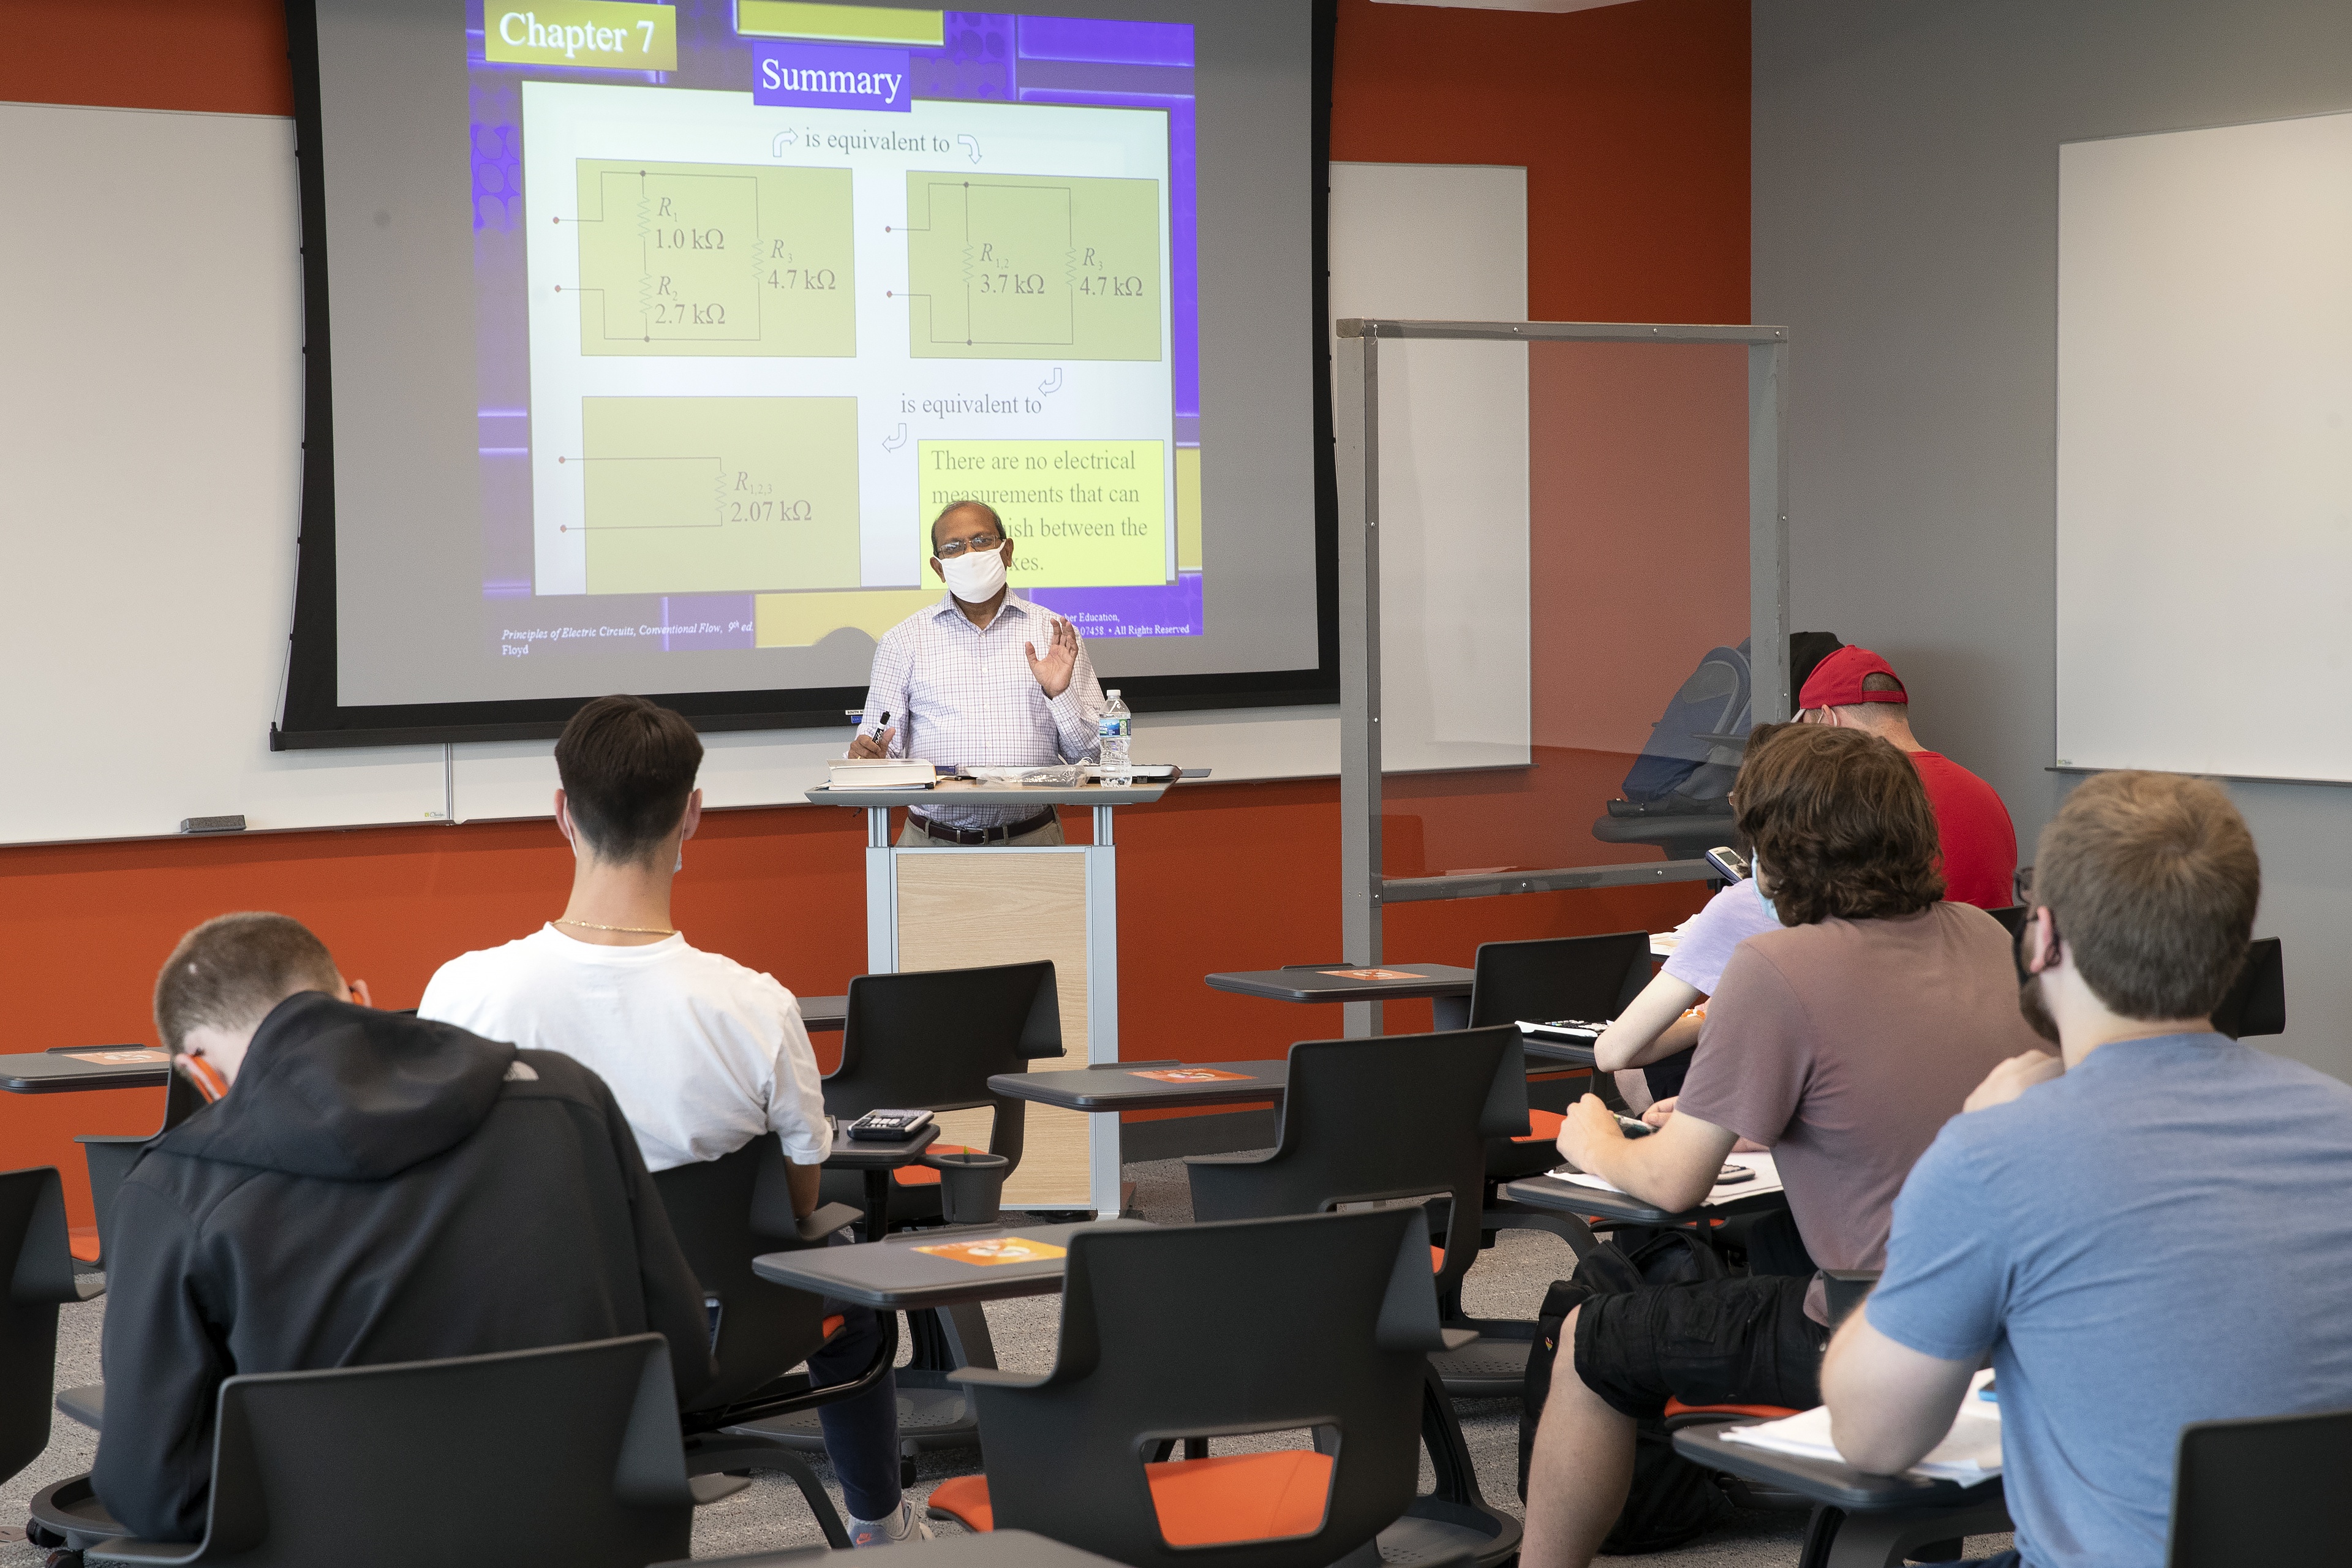 Professor Sri Kolla lectures in his ECET (Electronics and Computer Engineering Technology) 2400 Electric Circuits class.